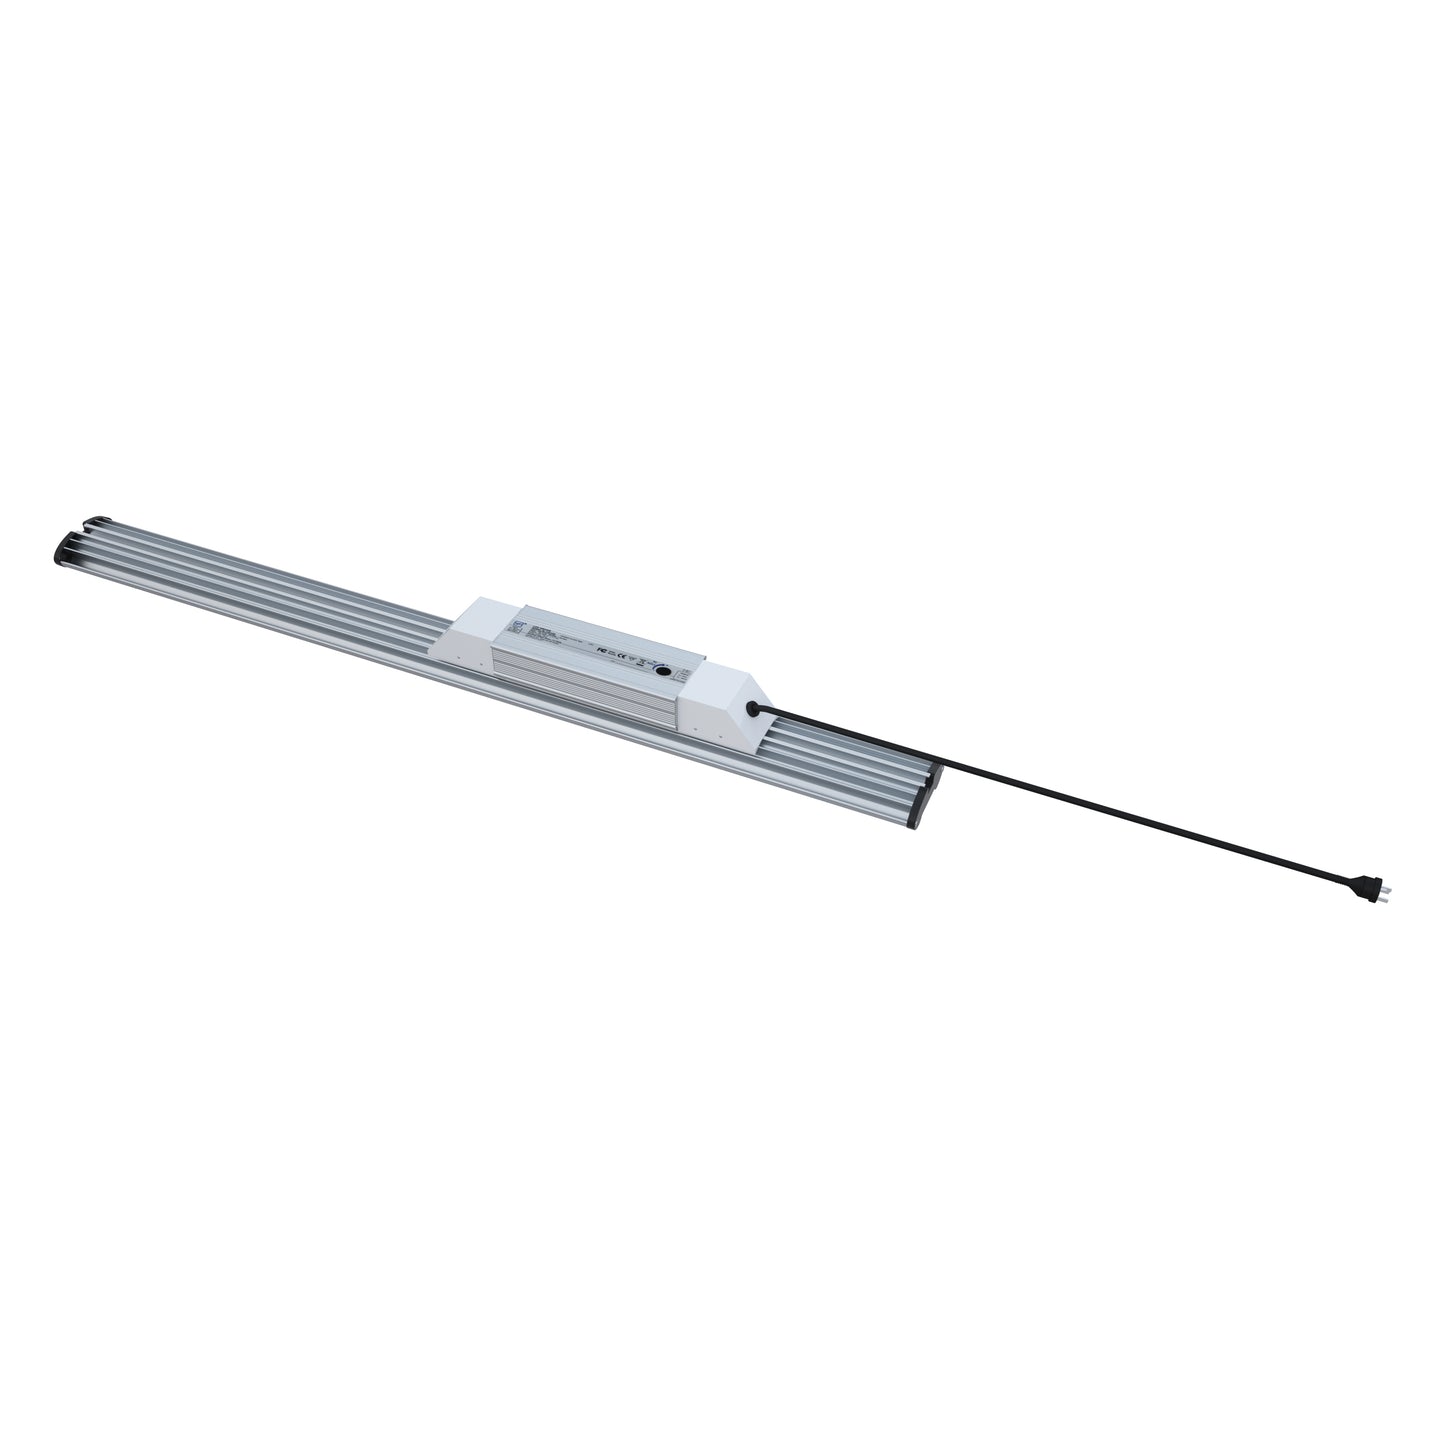 Bright Light Italy Led Bar 60W - Led Coltivazione Indoor